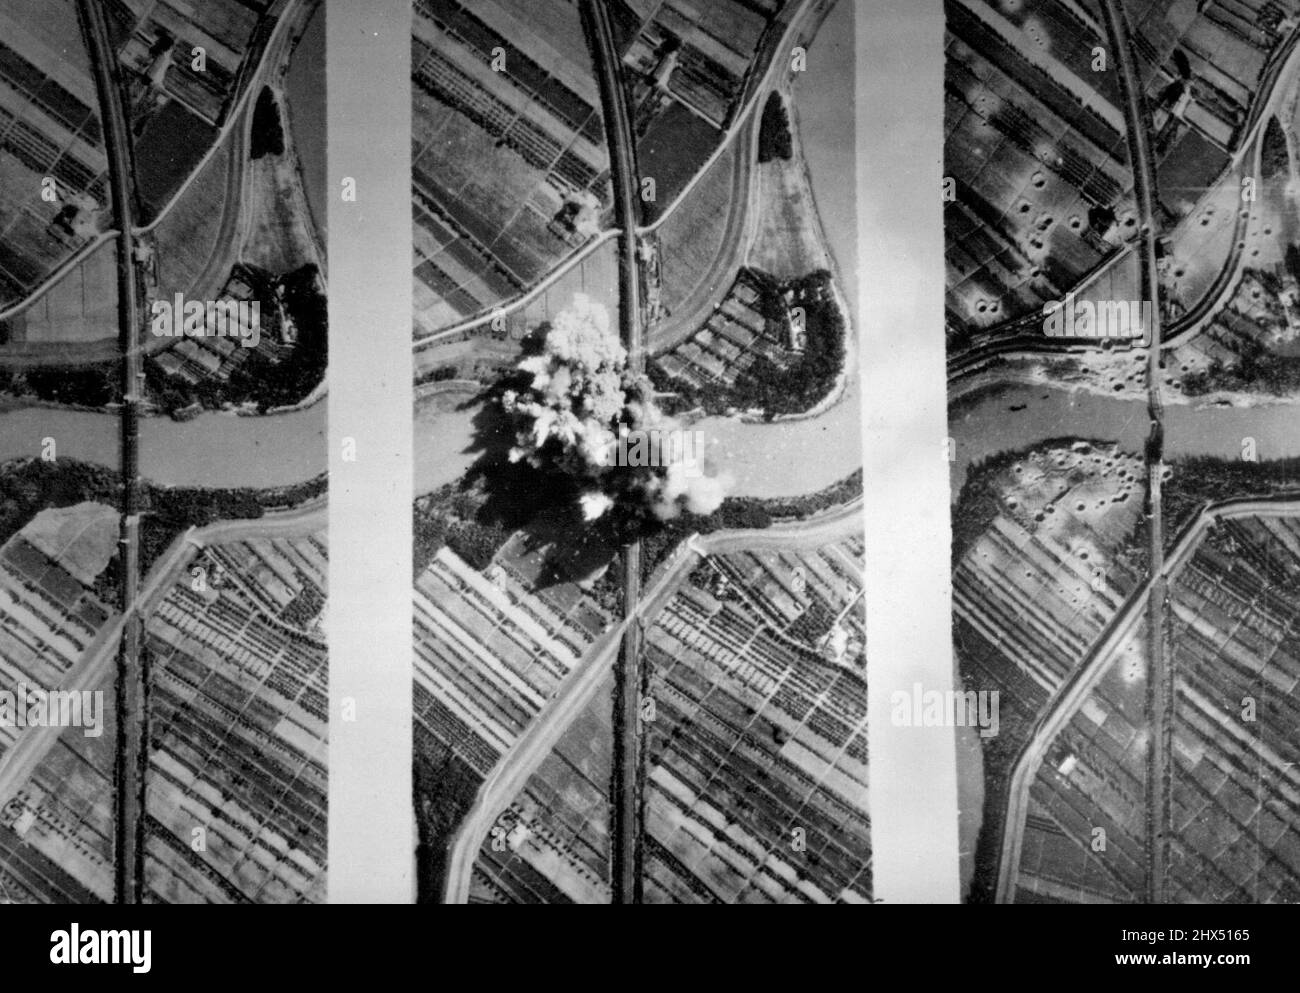 American Precision Bombing destroys Italian BridgeThese three photos illustrate graphically the result of precision bombing by an American plane in Italy. The picture at the left was taken before the bombing of the San Dona Dia Piave railroad bridge in northern Italy, a short distance form Venice. In the center photo bomb bursts are exploding on the span. The photo at the right shows the destroyed bridge,with only a shattered mass of steel left to remind the enemy that here was once a vital link in his hard-pressed transportation system. The bomb crators on both sides of the approaches testify Stock Photo